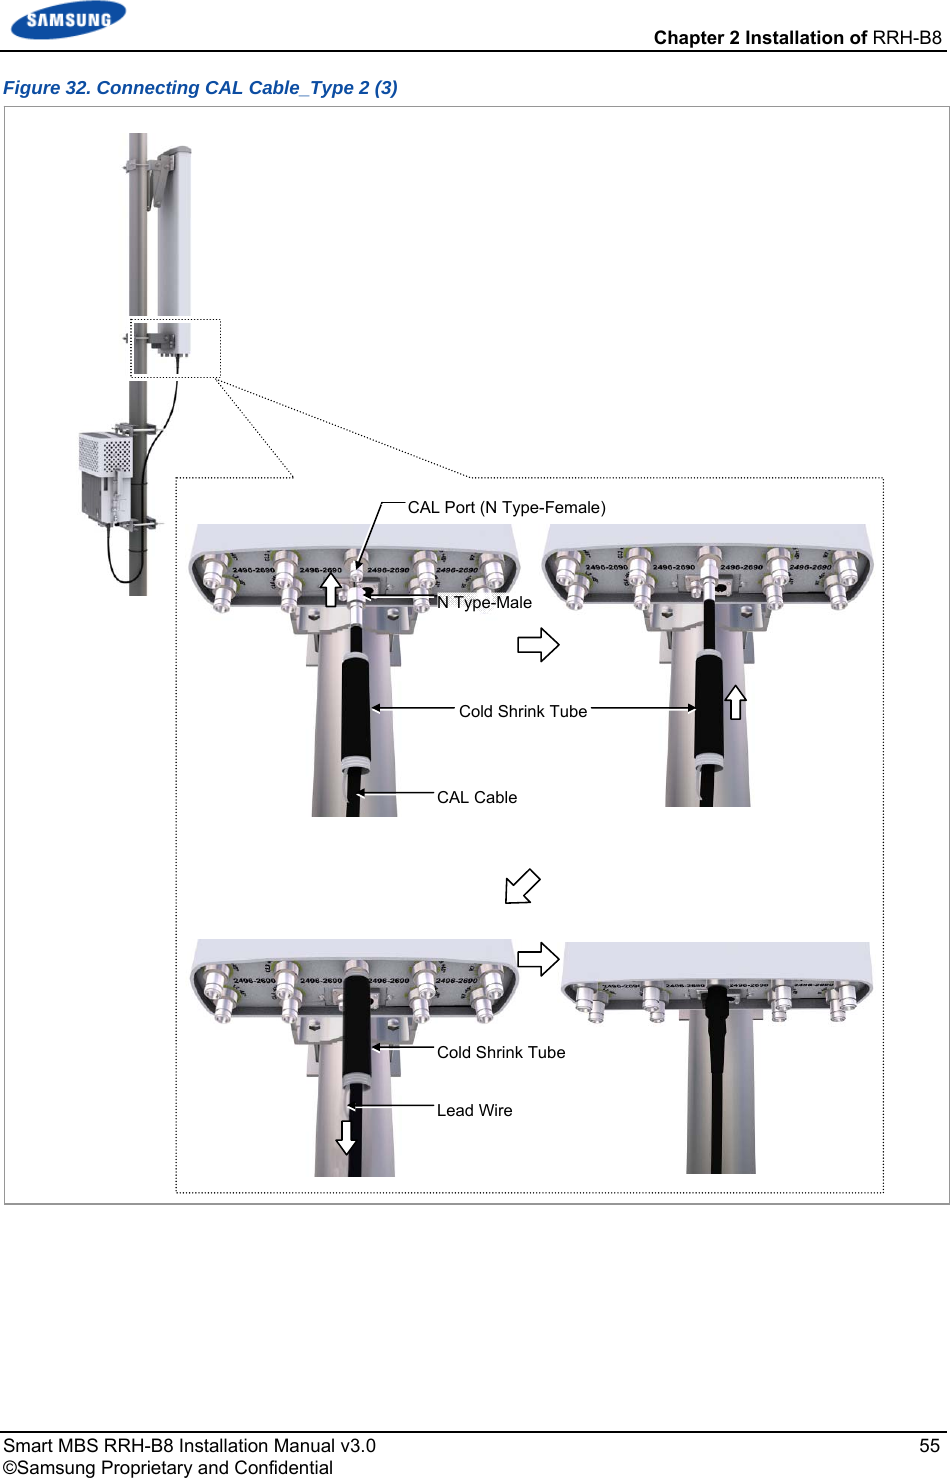  Chapter 2 Installation of RRH-B8 Smart MBS RRH-B8 Installation Manual v3.0   55 ©Samsung Proprietary and Confidential Figure 32. Connecting CAL Cable_Type 2 (3)     Cold Shrink TubeCAL Port (N Type-Female) CAL Cable N Type-MaleLead Wire Cold Shrink Tube